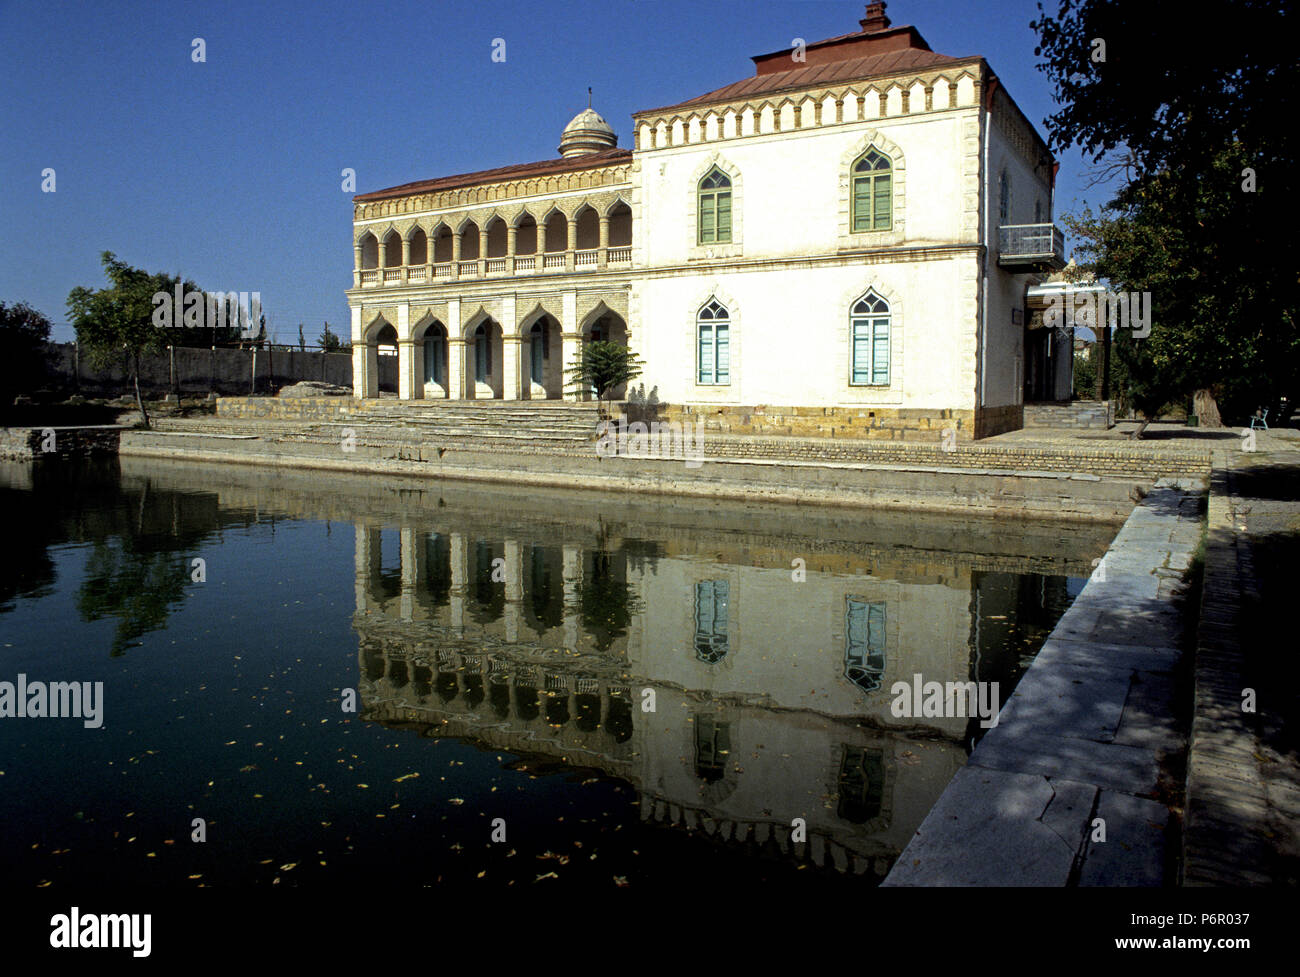 Summer residence of Alim Khan, the last emir of Bukhara, undated image from October 1992. The palace named Sitorai Mohi Xosa is located 4 km away from the historical center of the city on the Silk Road. The largely Islamic center Bukharas was appointed in 1993 as a UNESCO World Heritage Site, the State of Uzbekistan after the collapse of the Soviet Union on 01.09.1991 its independence. Photo: Matthias Toedt / dpa central image / ZB / picture alliance | usage worldwide Stock Photo